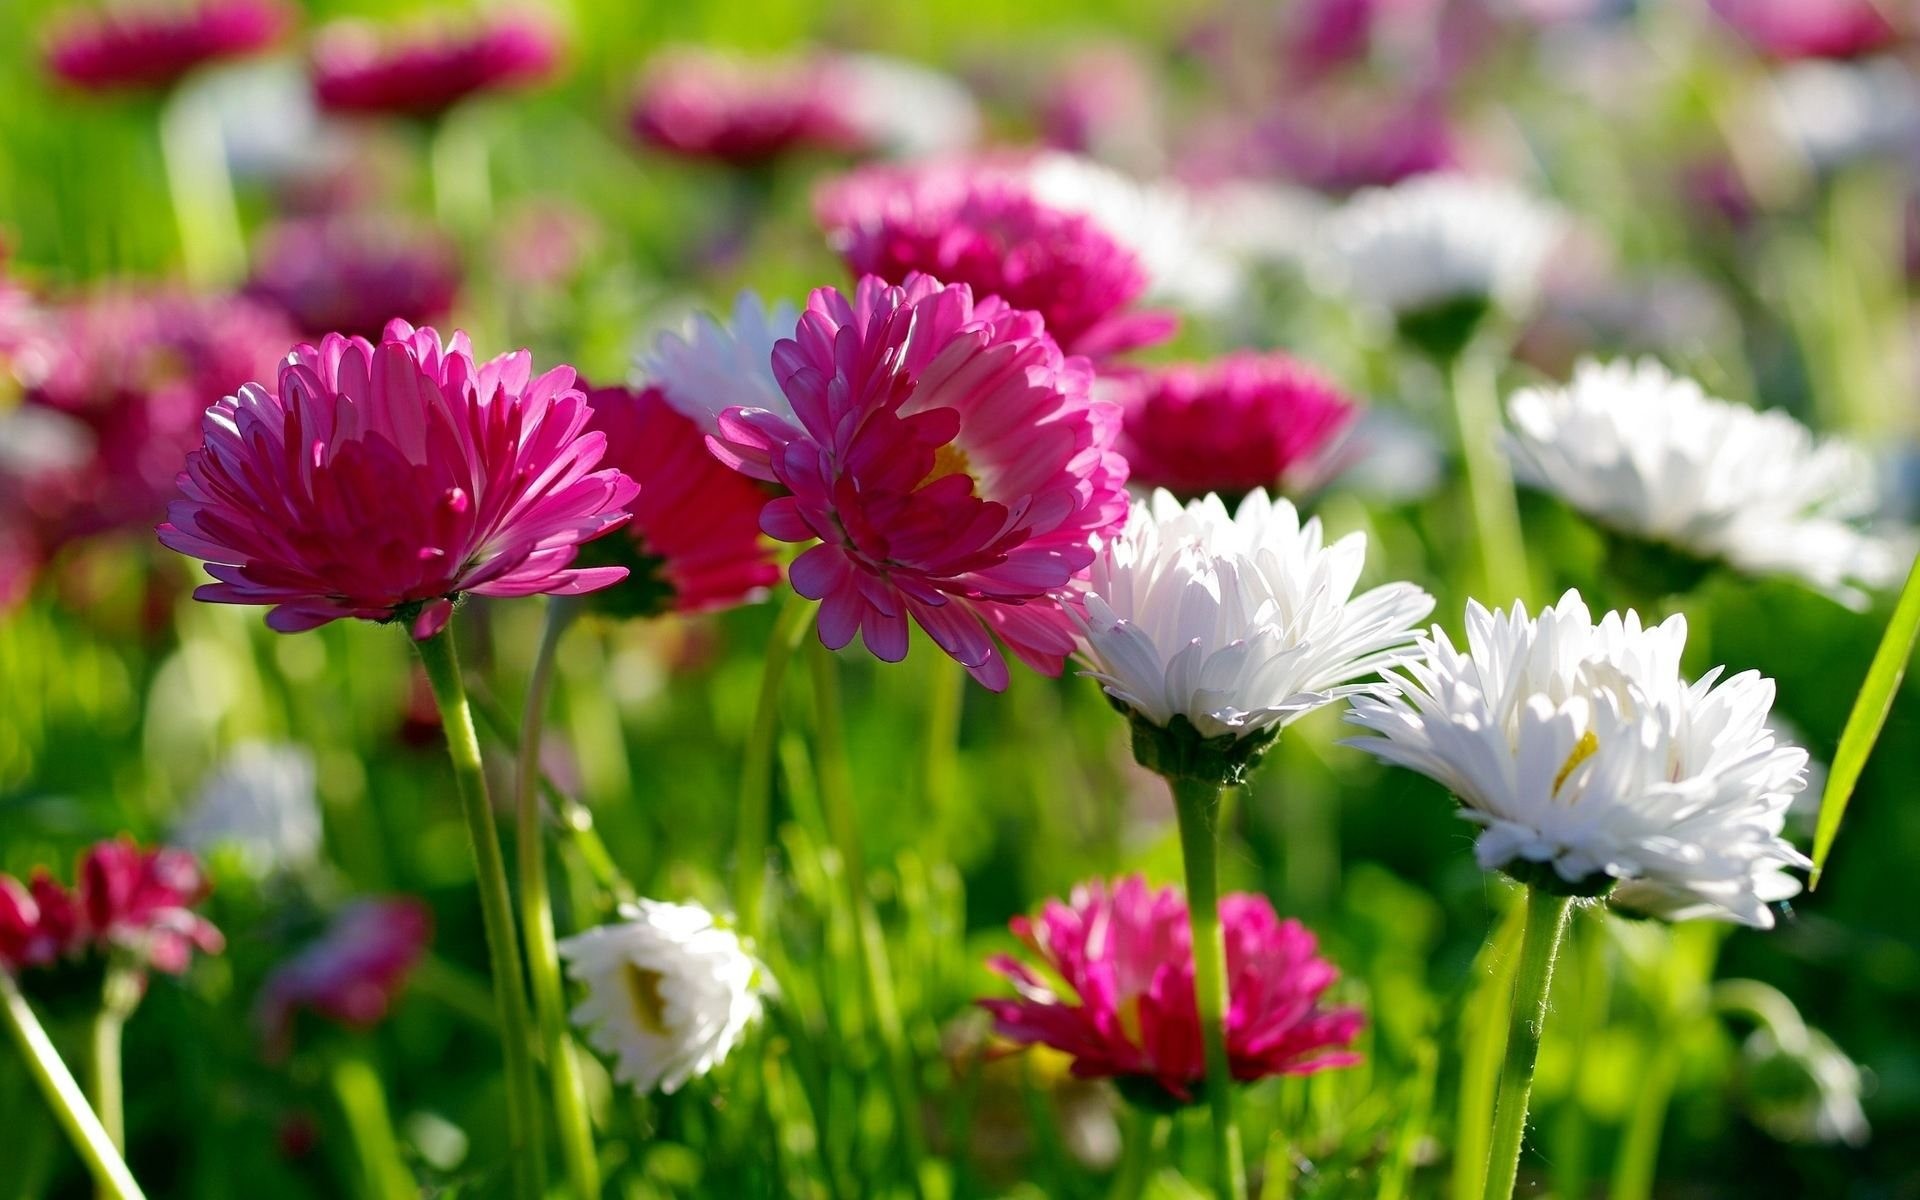 Spring flowers New Spring Flowers wallpaper download